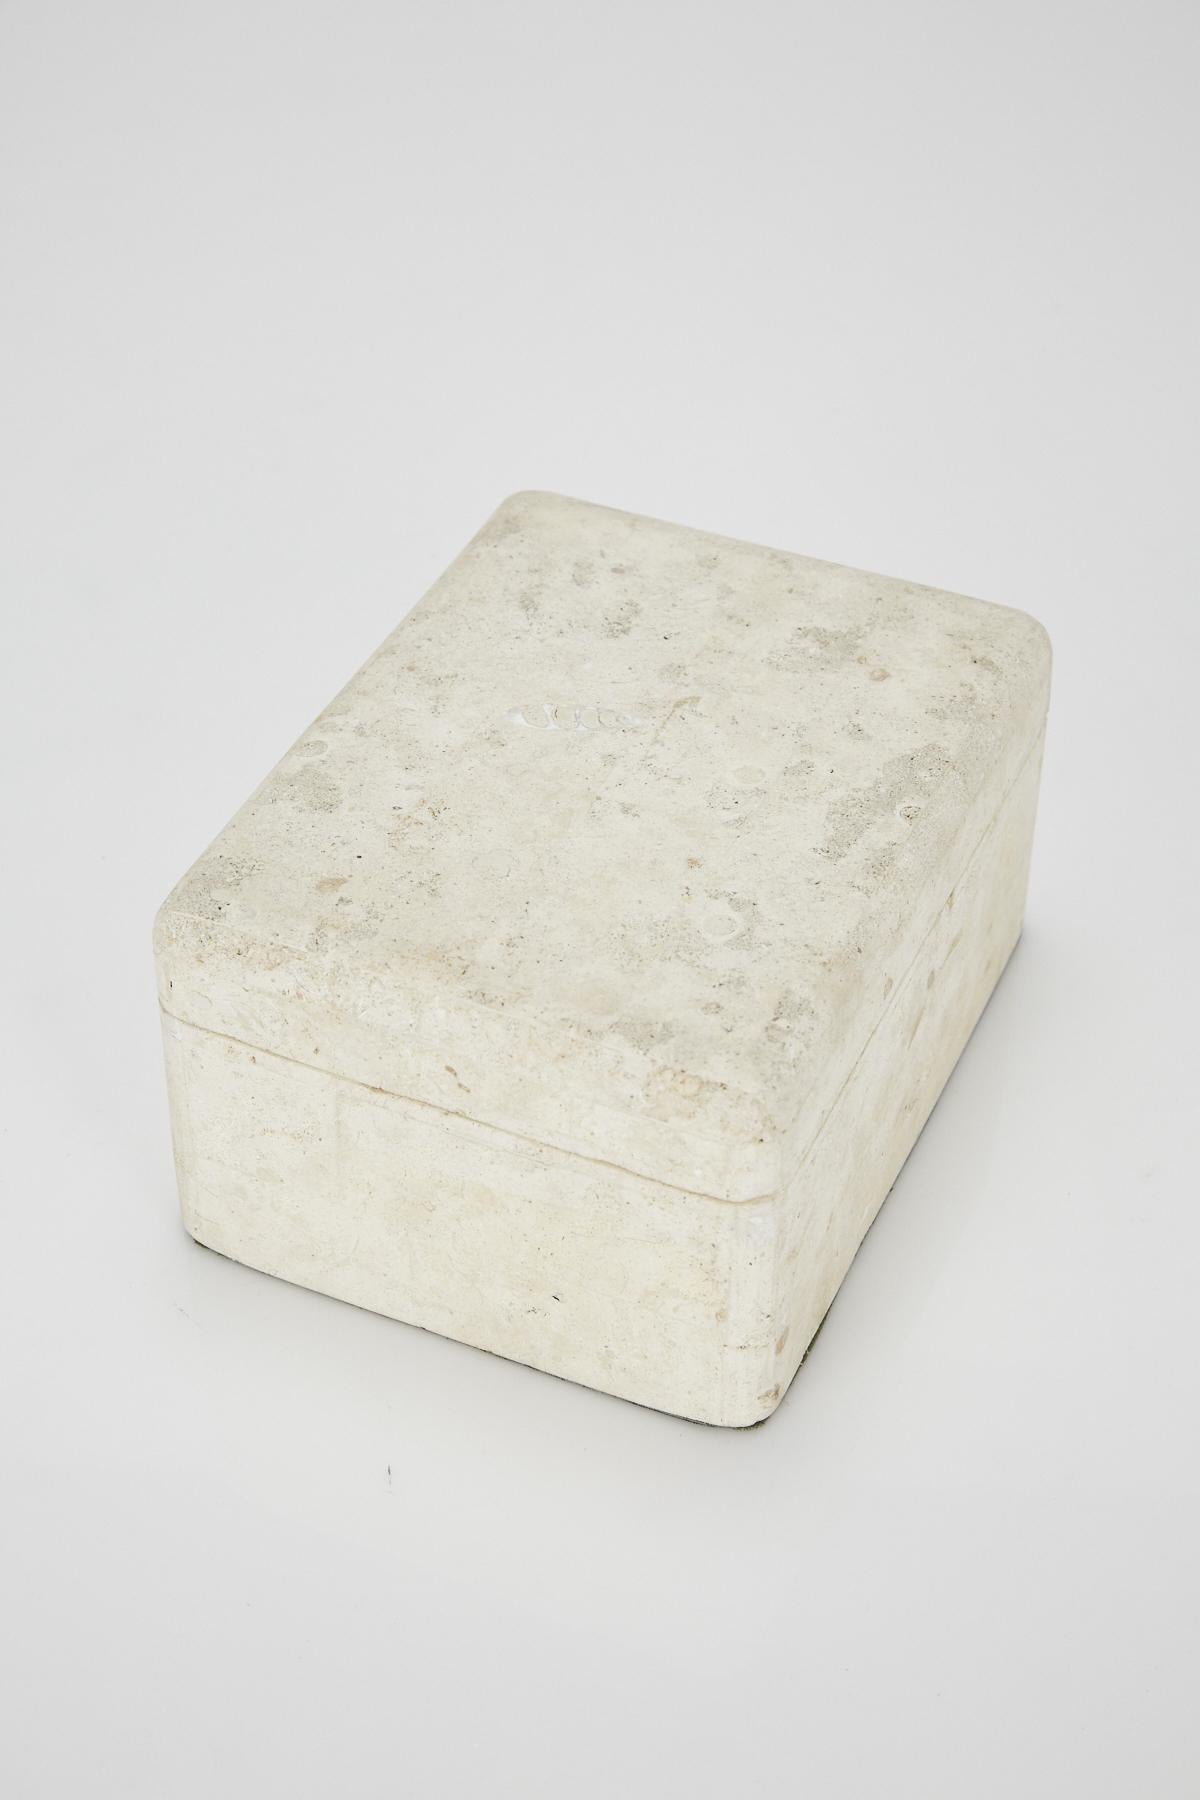 Large lidded box in matte white tessellated Mactan stone exterior and black felt-lined interior. Brass chain connects top and bottom. Underside lined in black felt. Simple rectangular form with lightly curved edges.

All furnishings are made from